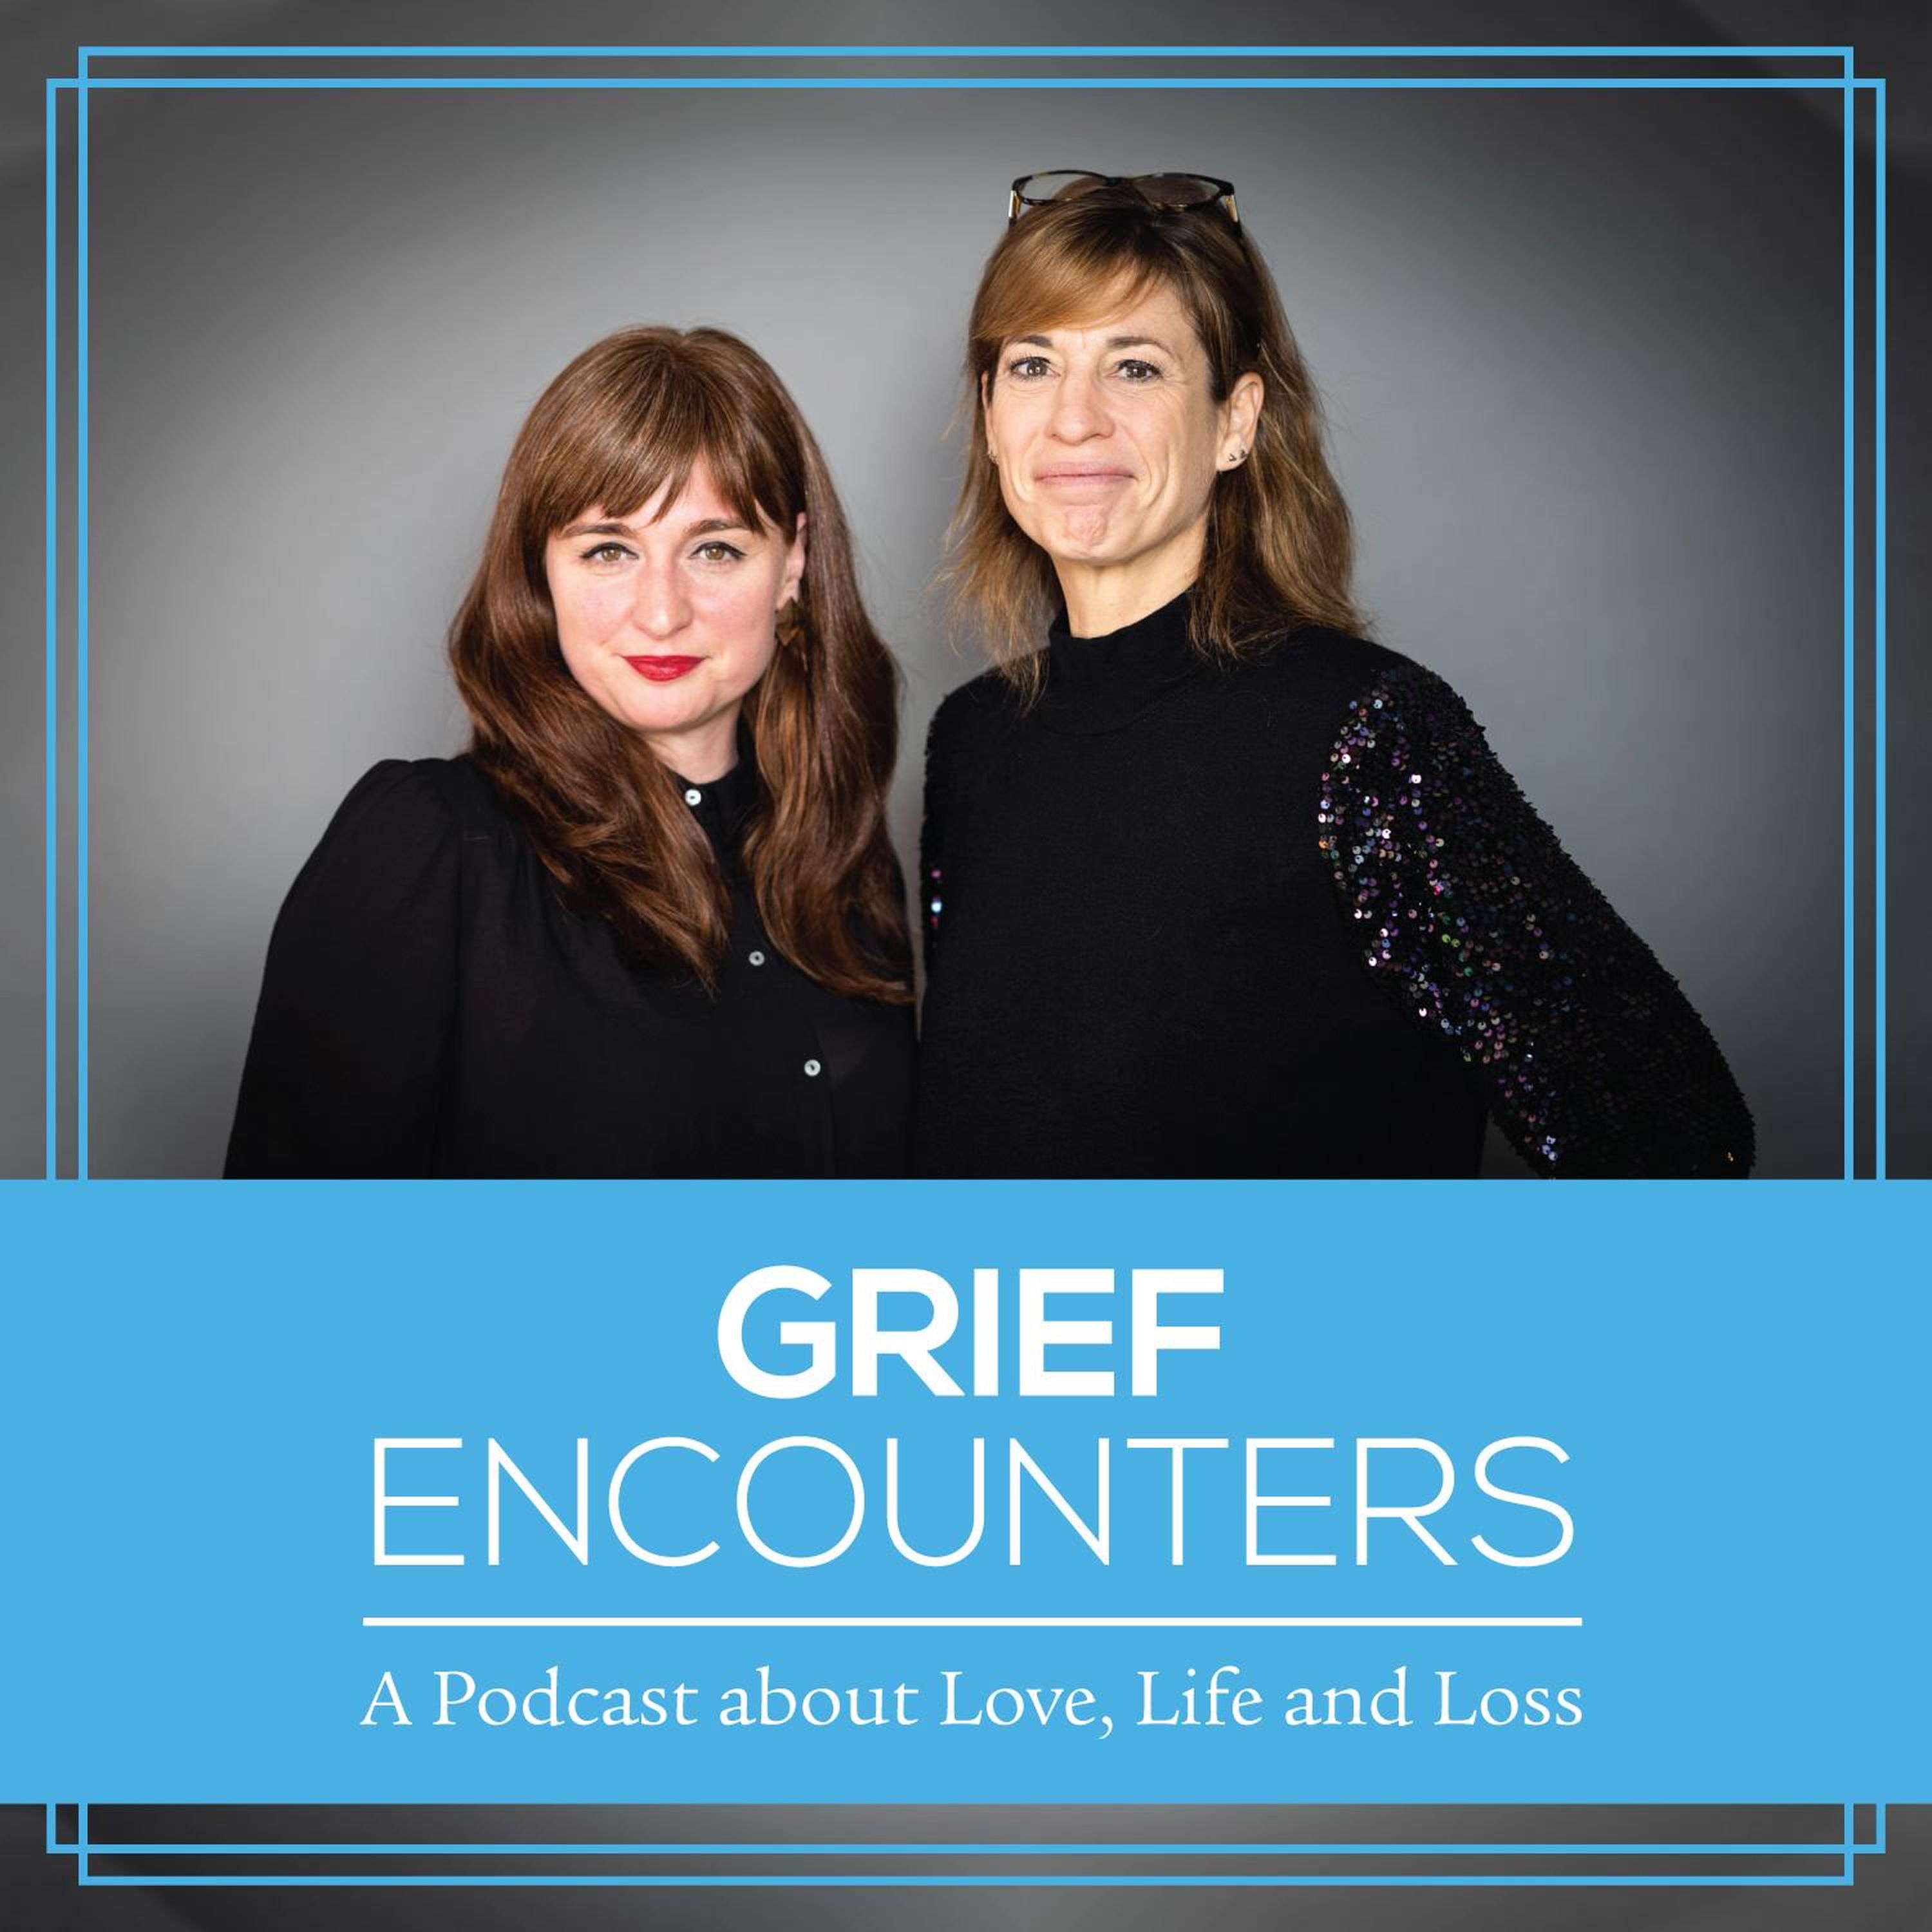 Grieving Online Friends: is it the same as IRL? - Refuge In Grief